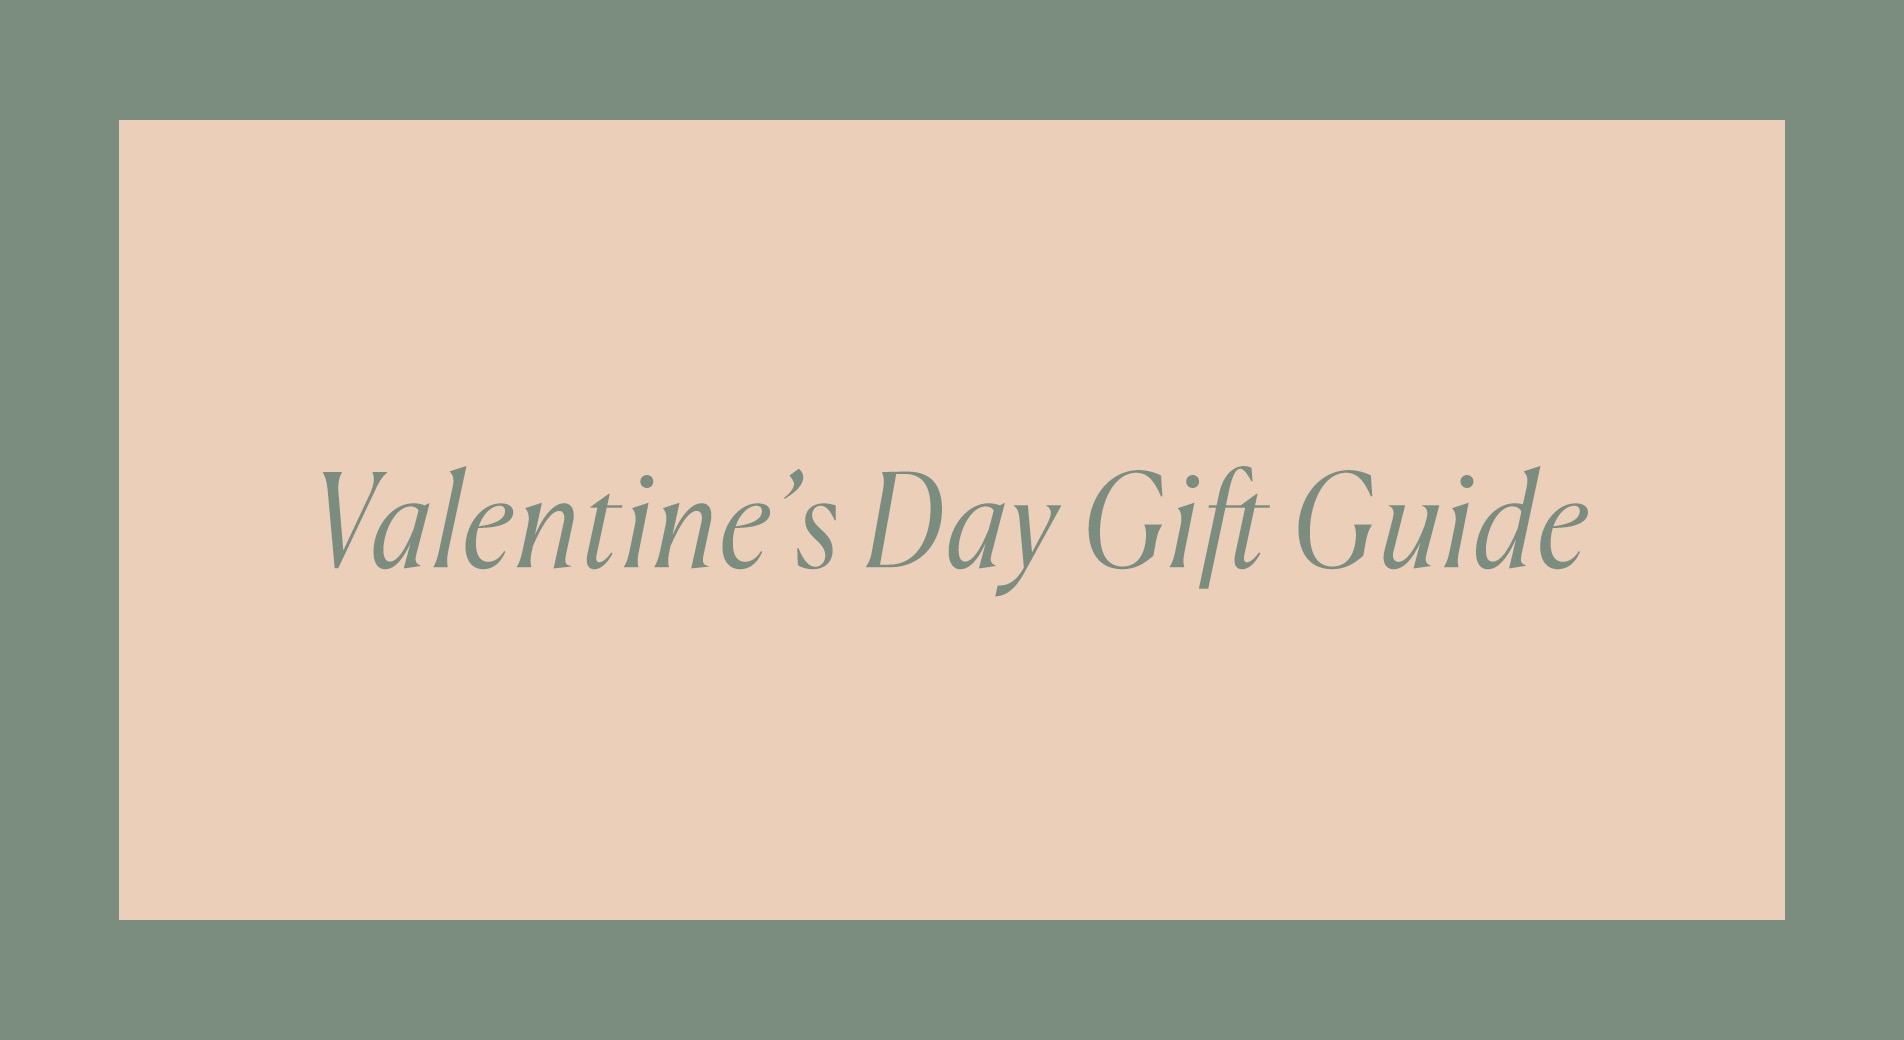 banner in rose pink and green. text inside says valentine's day gift guide.